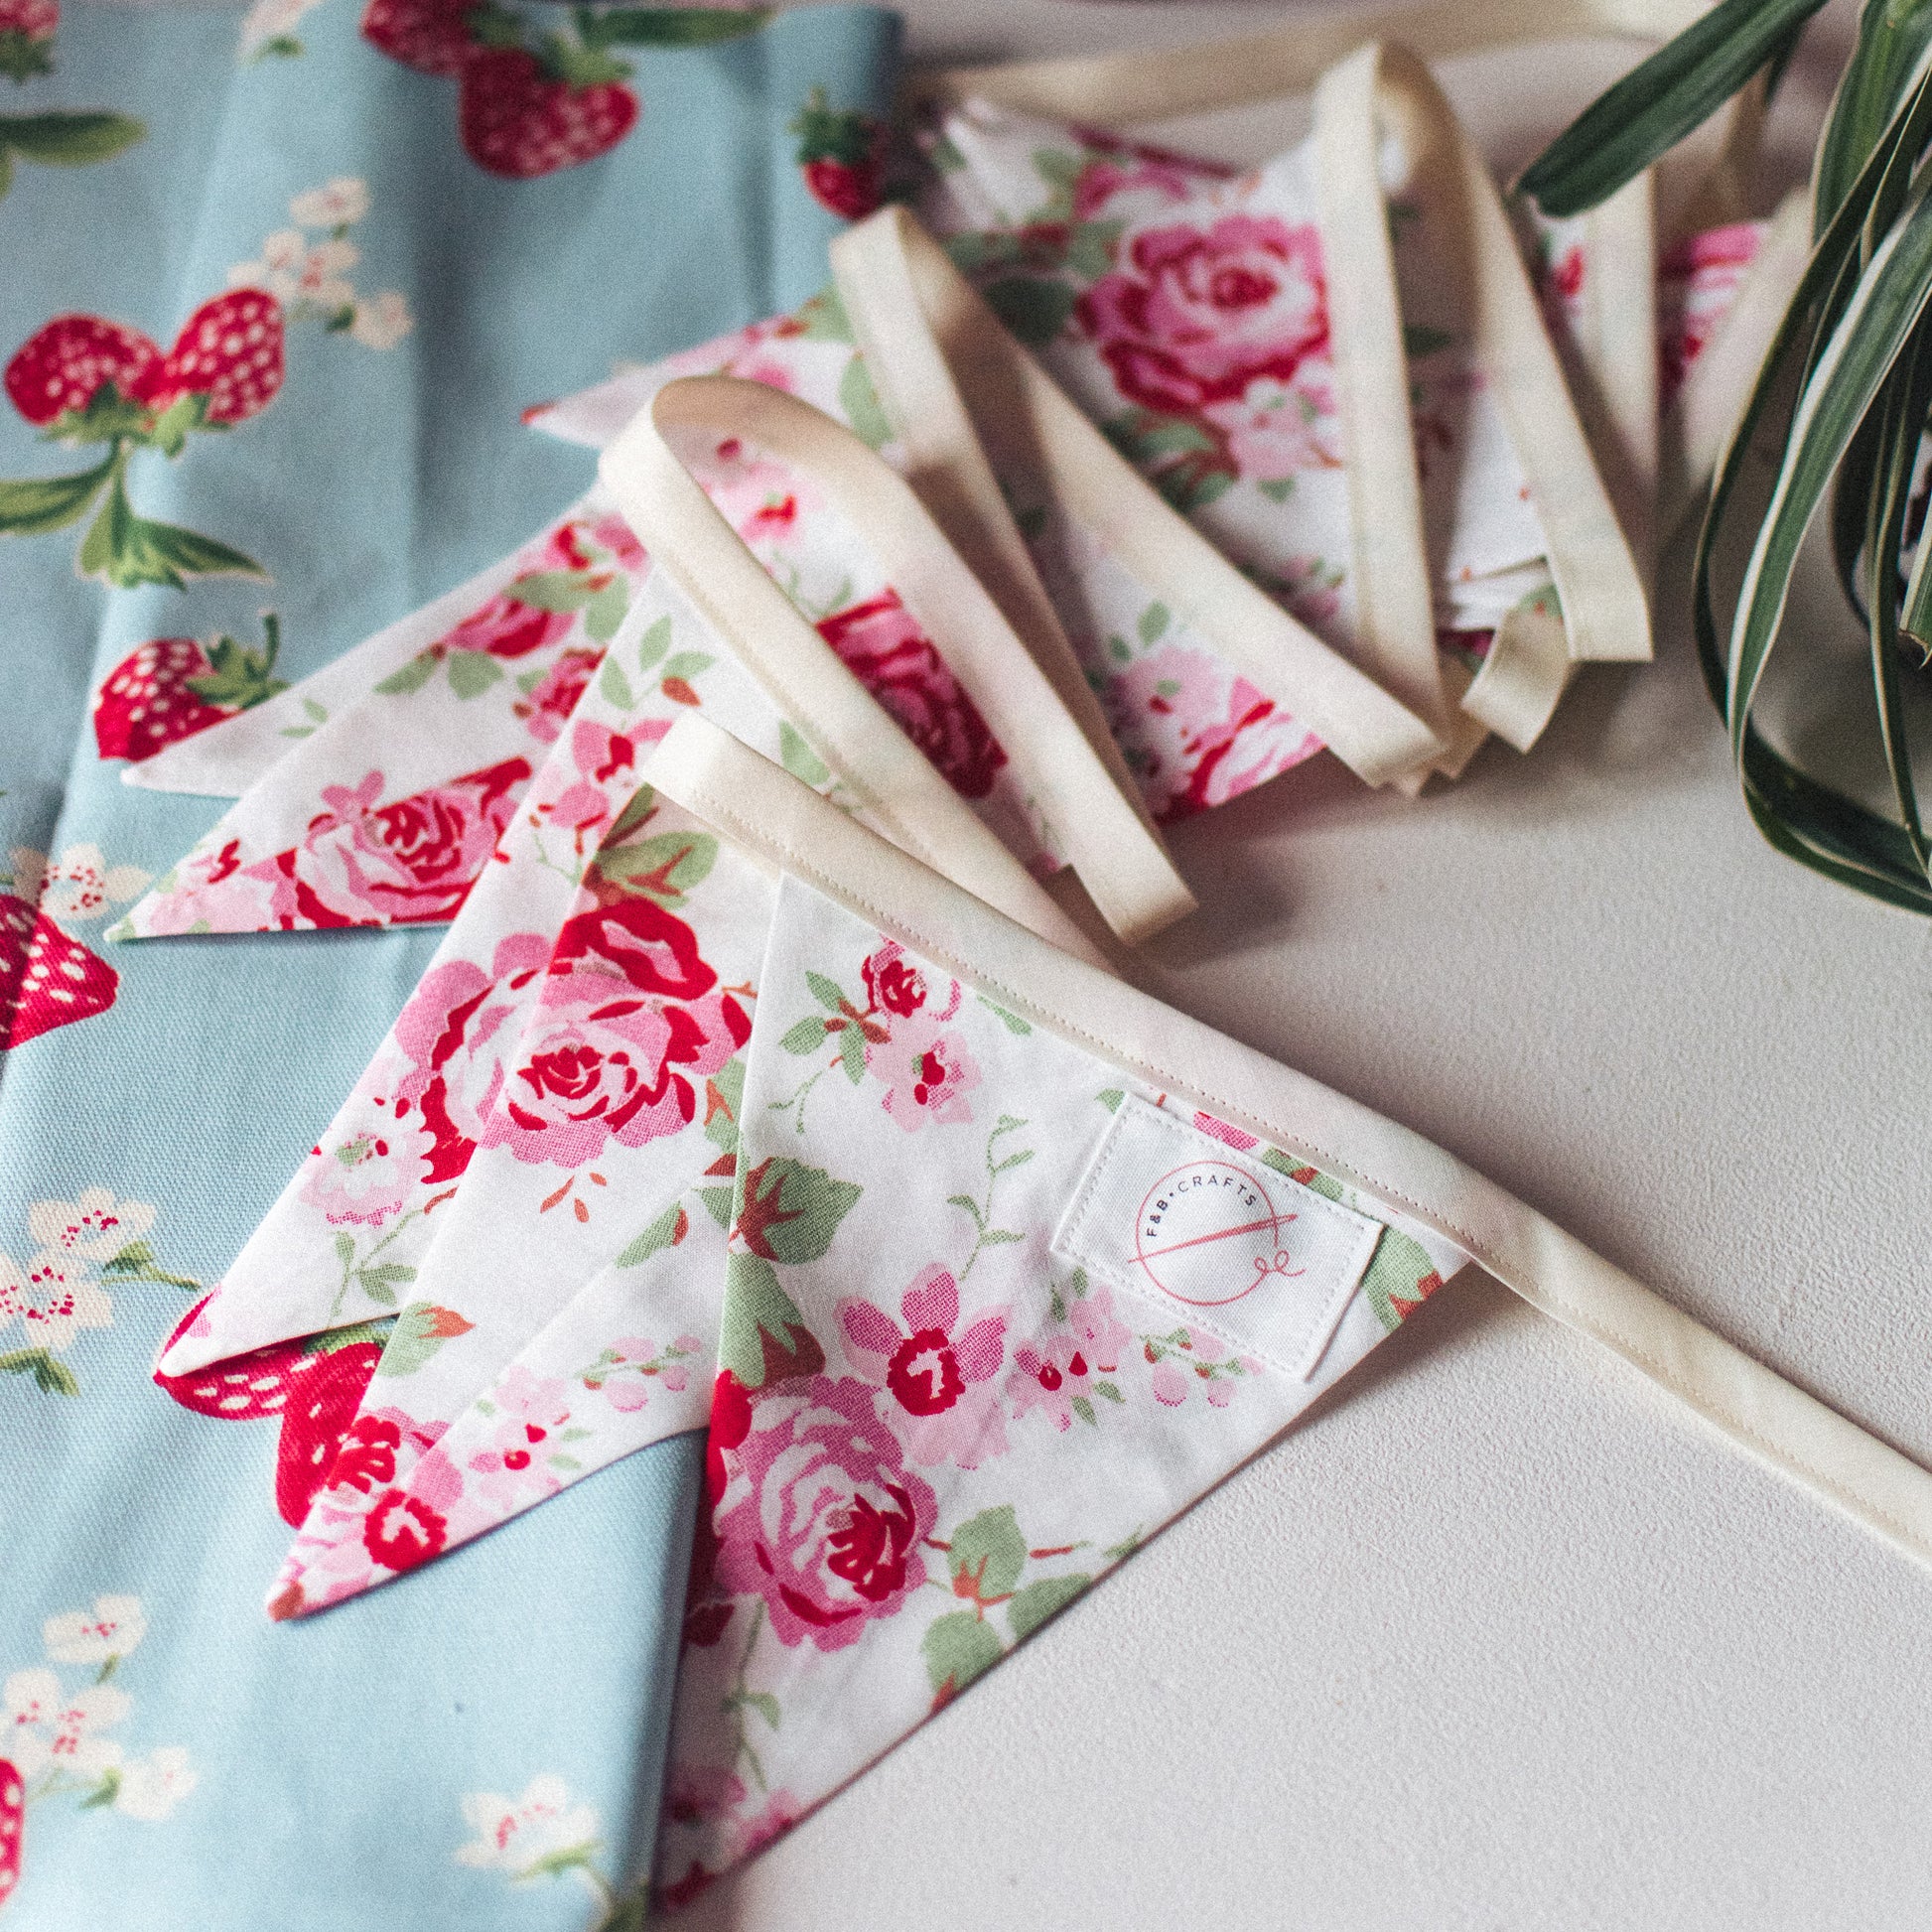 Rosali Vintage Style Cath Kidston Bunting - 3-meter set with 15 segments, showcasing delicate pink roses on both sides